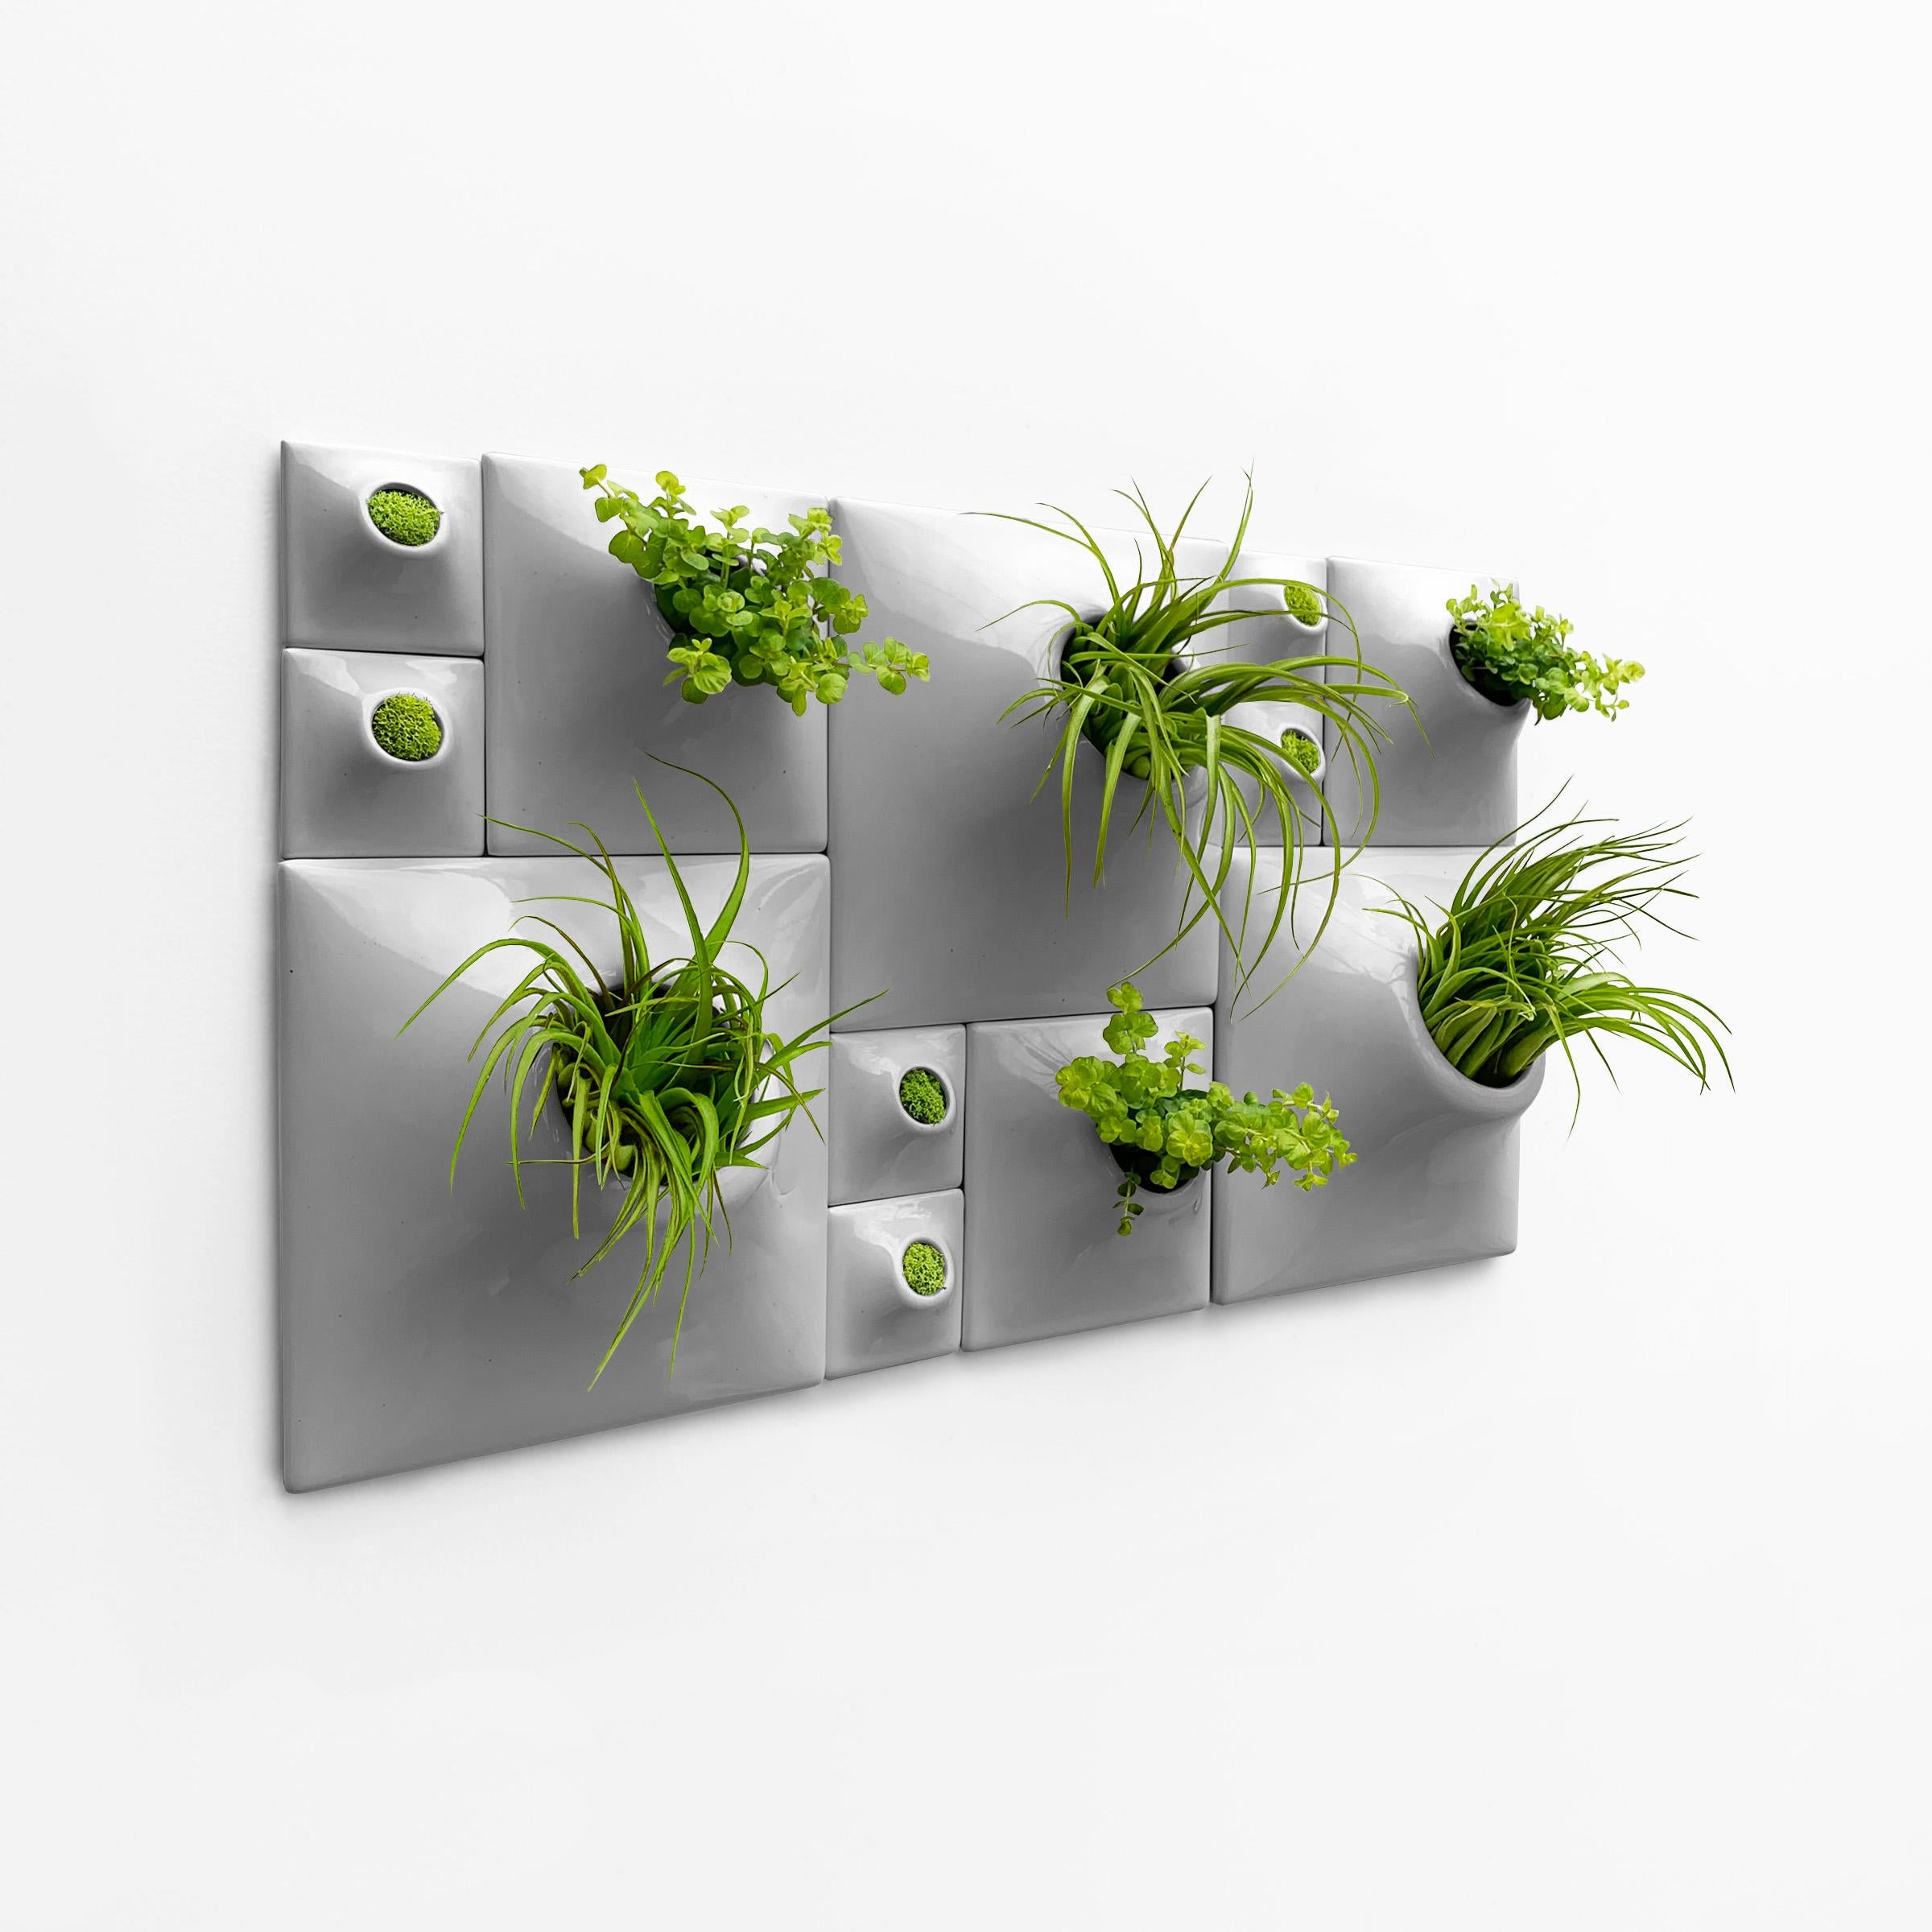 Modern Gray Greenwall, Mid Century Modern Wall Decor, Moss Wall Art, Node BS3M

Transform your modern interior design into an exciting greenwall and epicenter of living wall art with this striking Node Wall Planter set. Let your eyes wander over